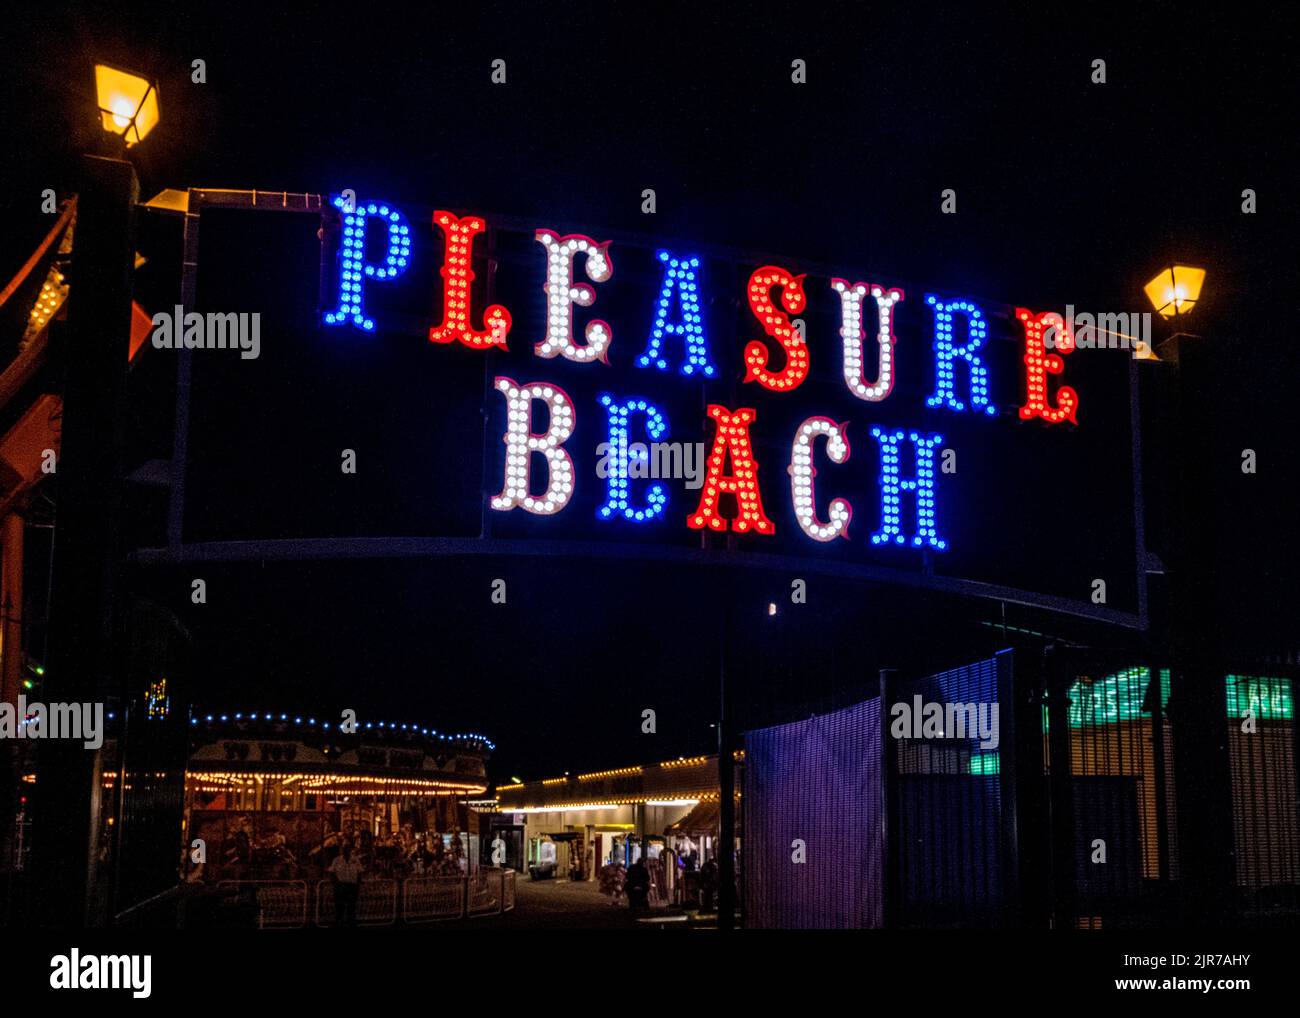 Neon Lights in the night sky for the 'Pleasure Beach' in Great Yarmouth, a seaside town in Norfolk, England, UK. Stock Photo